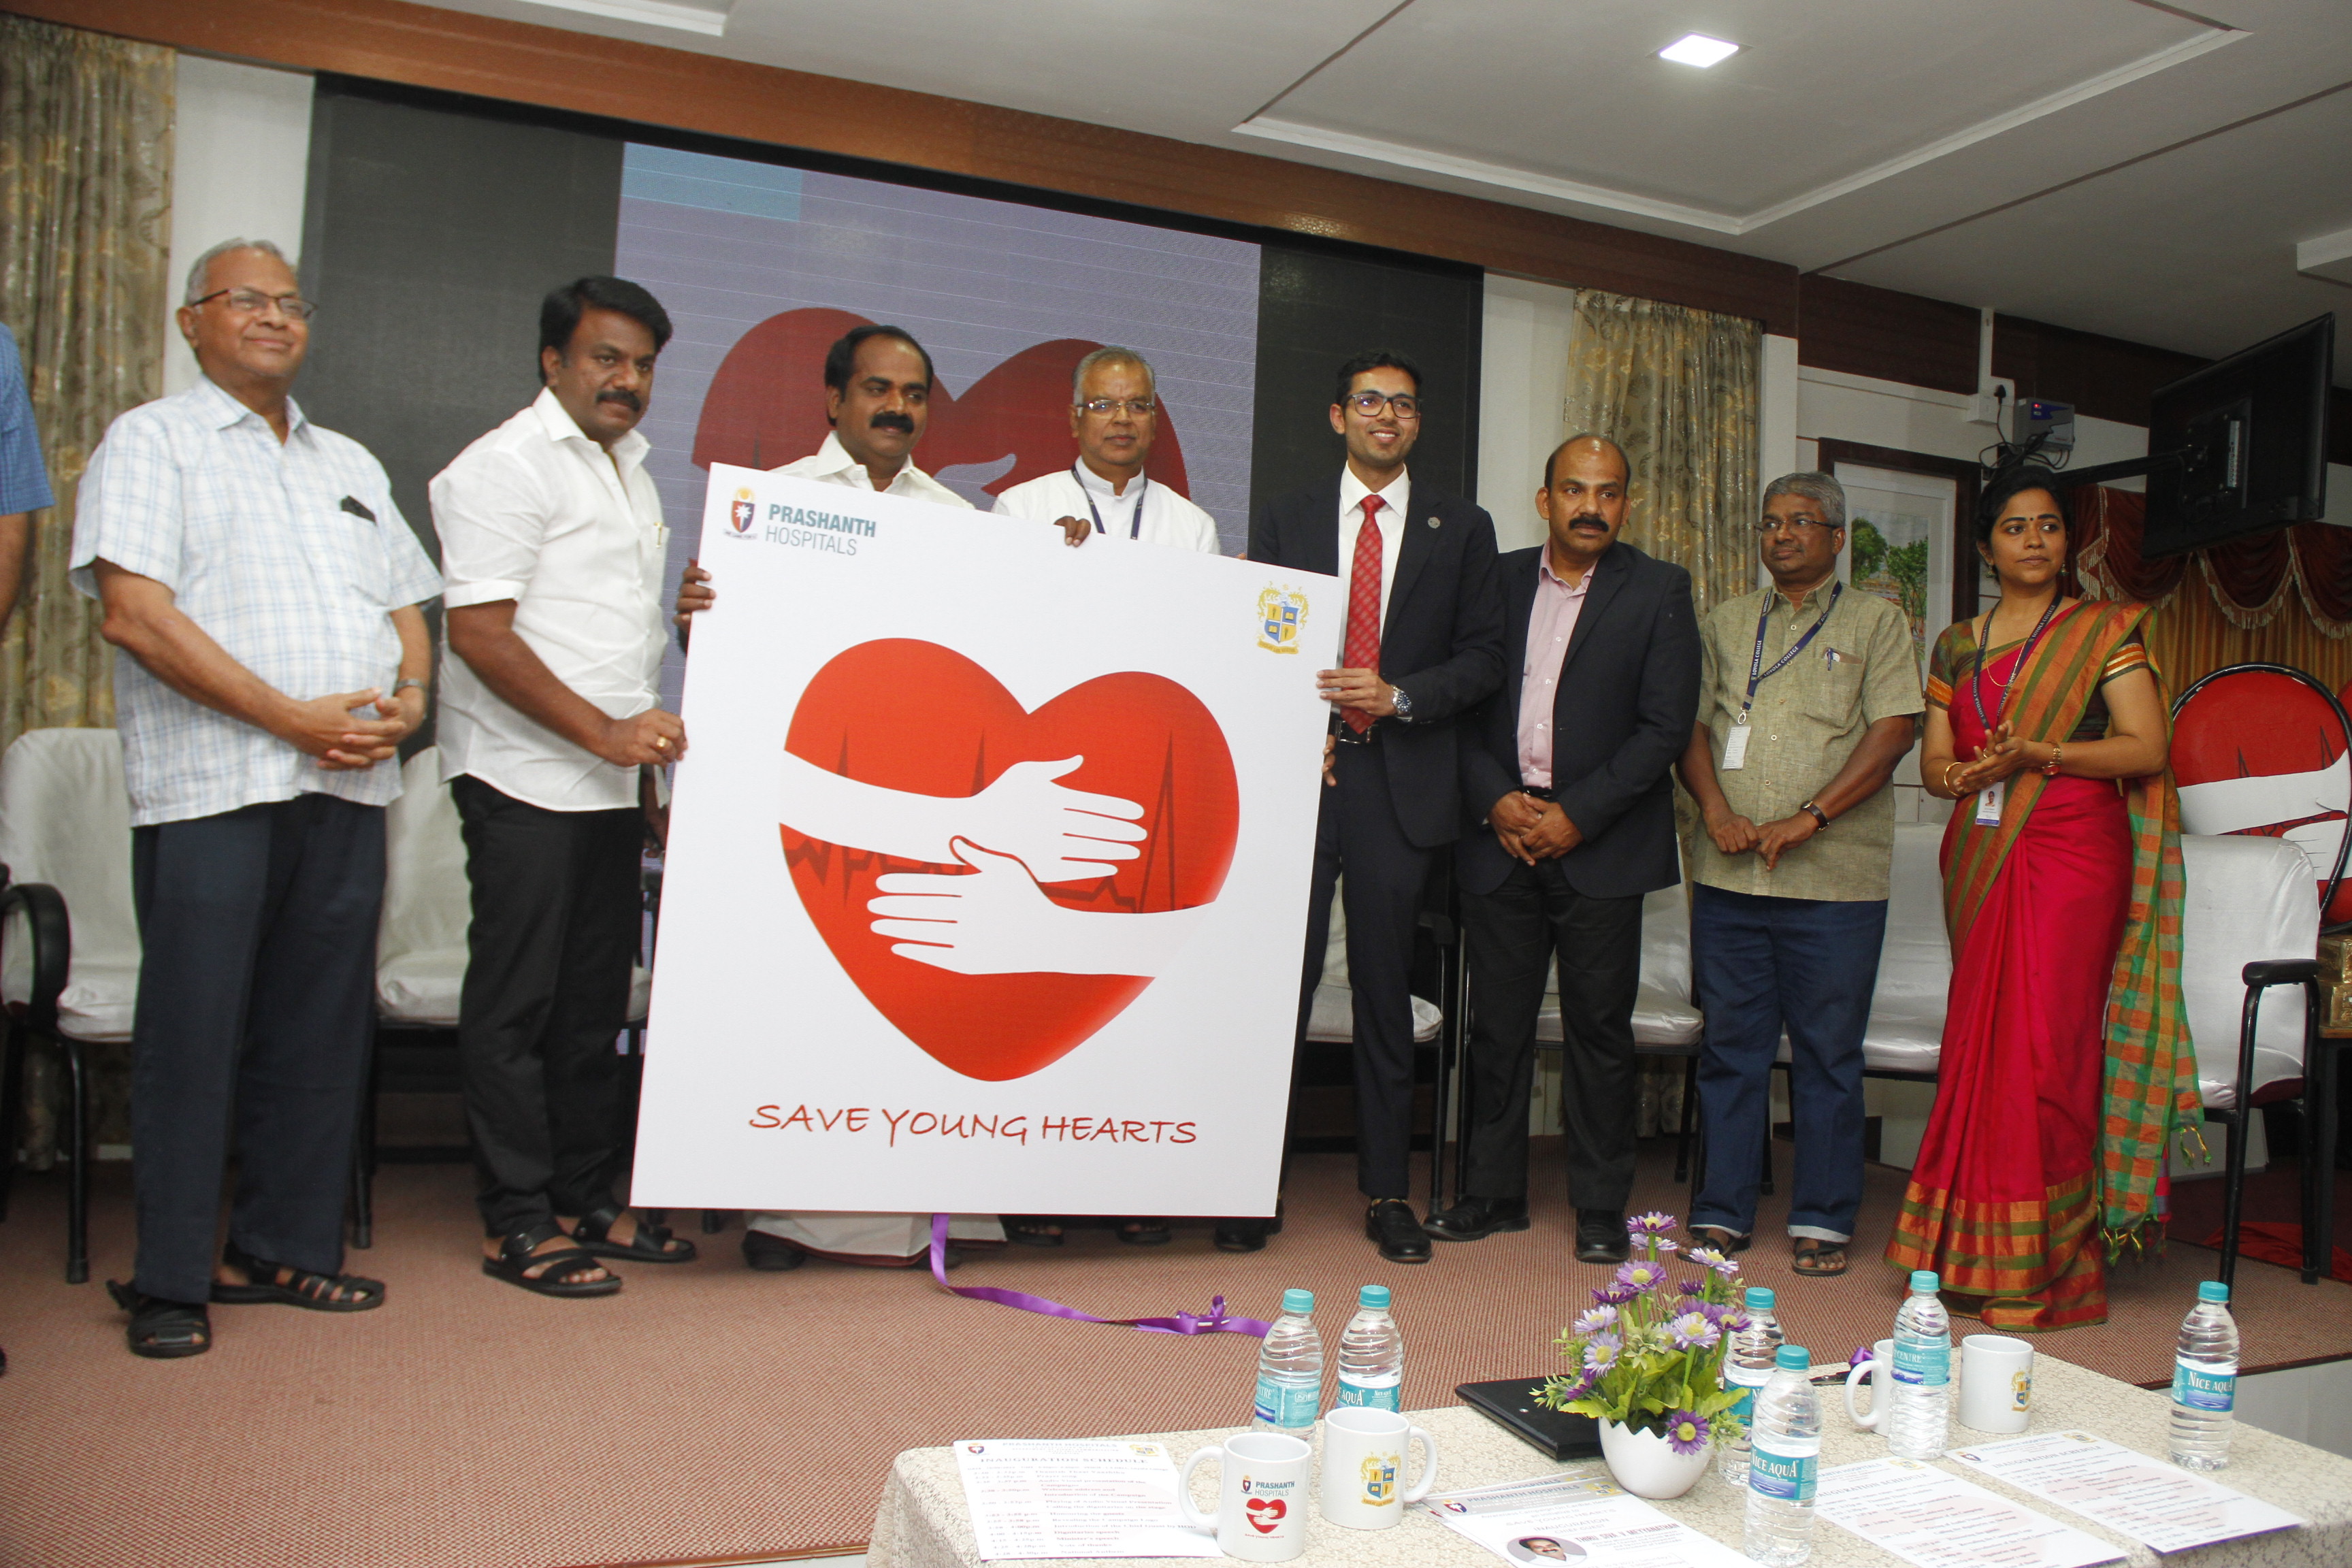 Cardiac Awareness Among Youngsters Launched in the City by Prashanth Hospitals in Partnership with Loyola College 